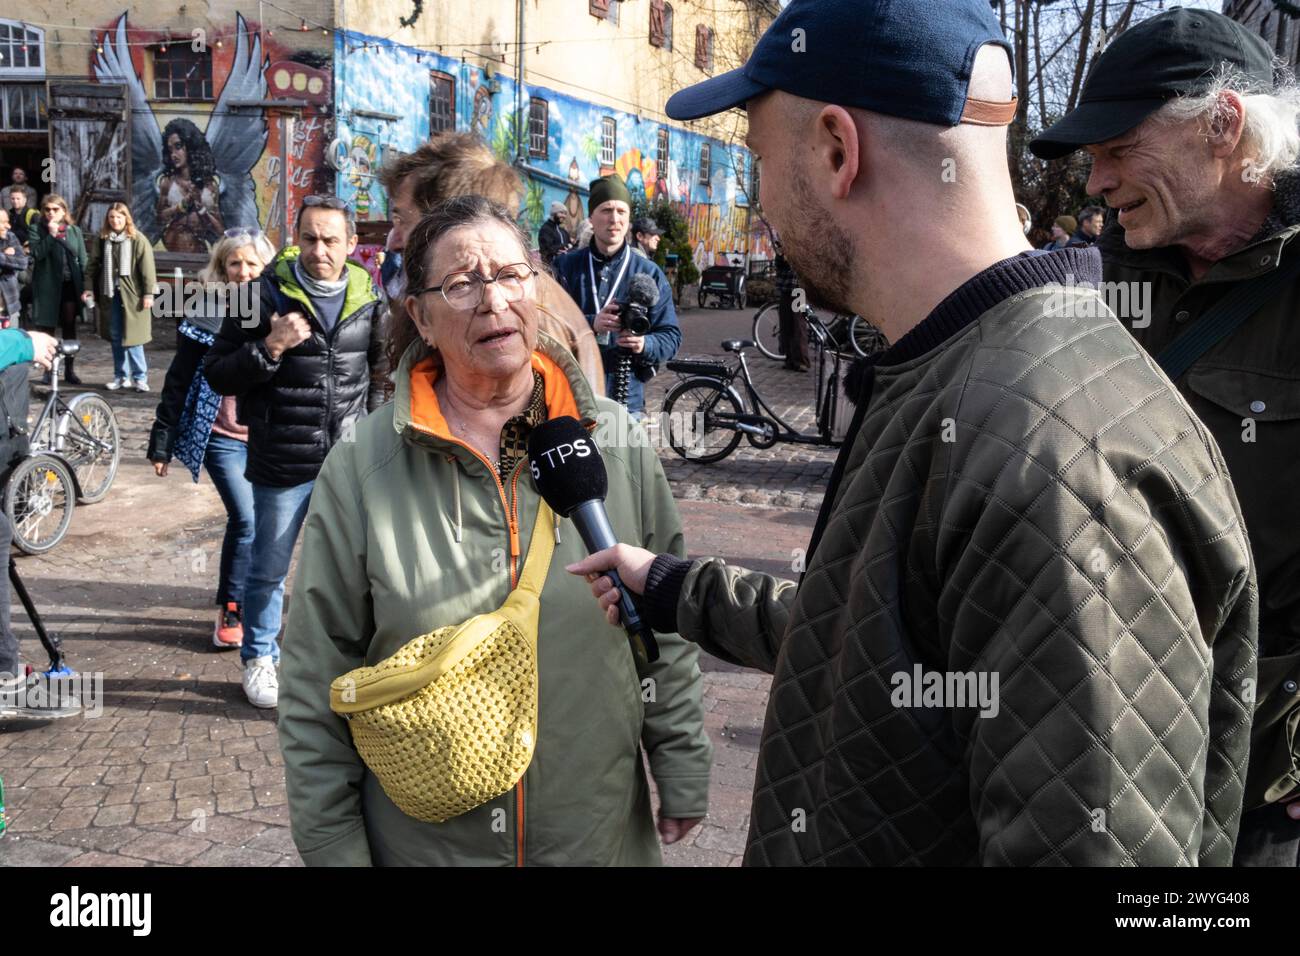 Danish stand-up comedian Morten Wichmann interviews Hulda Mader, Spokesperson for the press group at Christiania, for the TV program Taet pa sandheden during an action day Saturday 6 April 2024. At a meeting at Christiania in March, it was decided that the so-called Pusher Street in the famous Copenhagen neighbourhood should be dug up during a so-called action day 6 April. It is planned that Christianitter aided by workmen will dig up the street. People from outside Christiania are welcome to participate as informed by Christiania s spokesperson. By digging up the street, the Christiania inhab Stock Photo